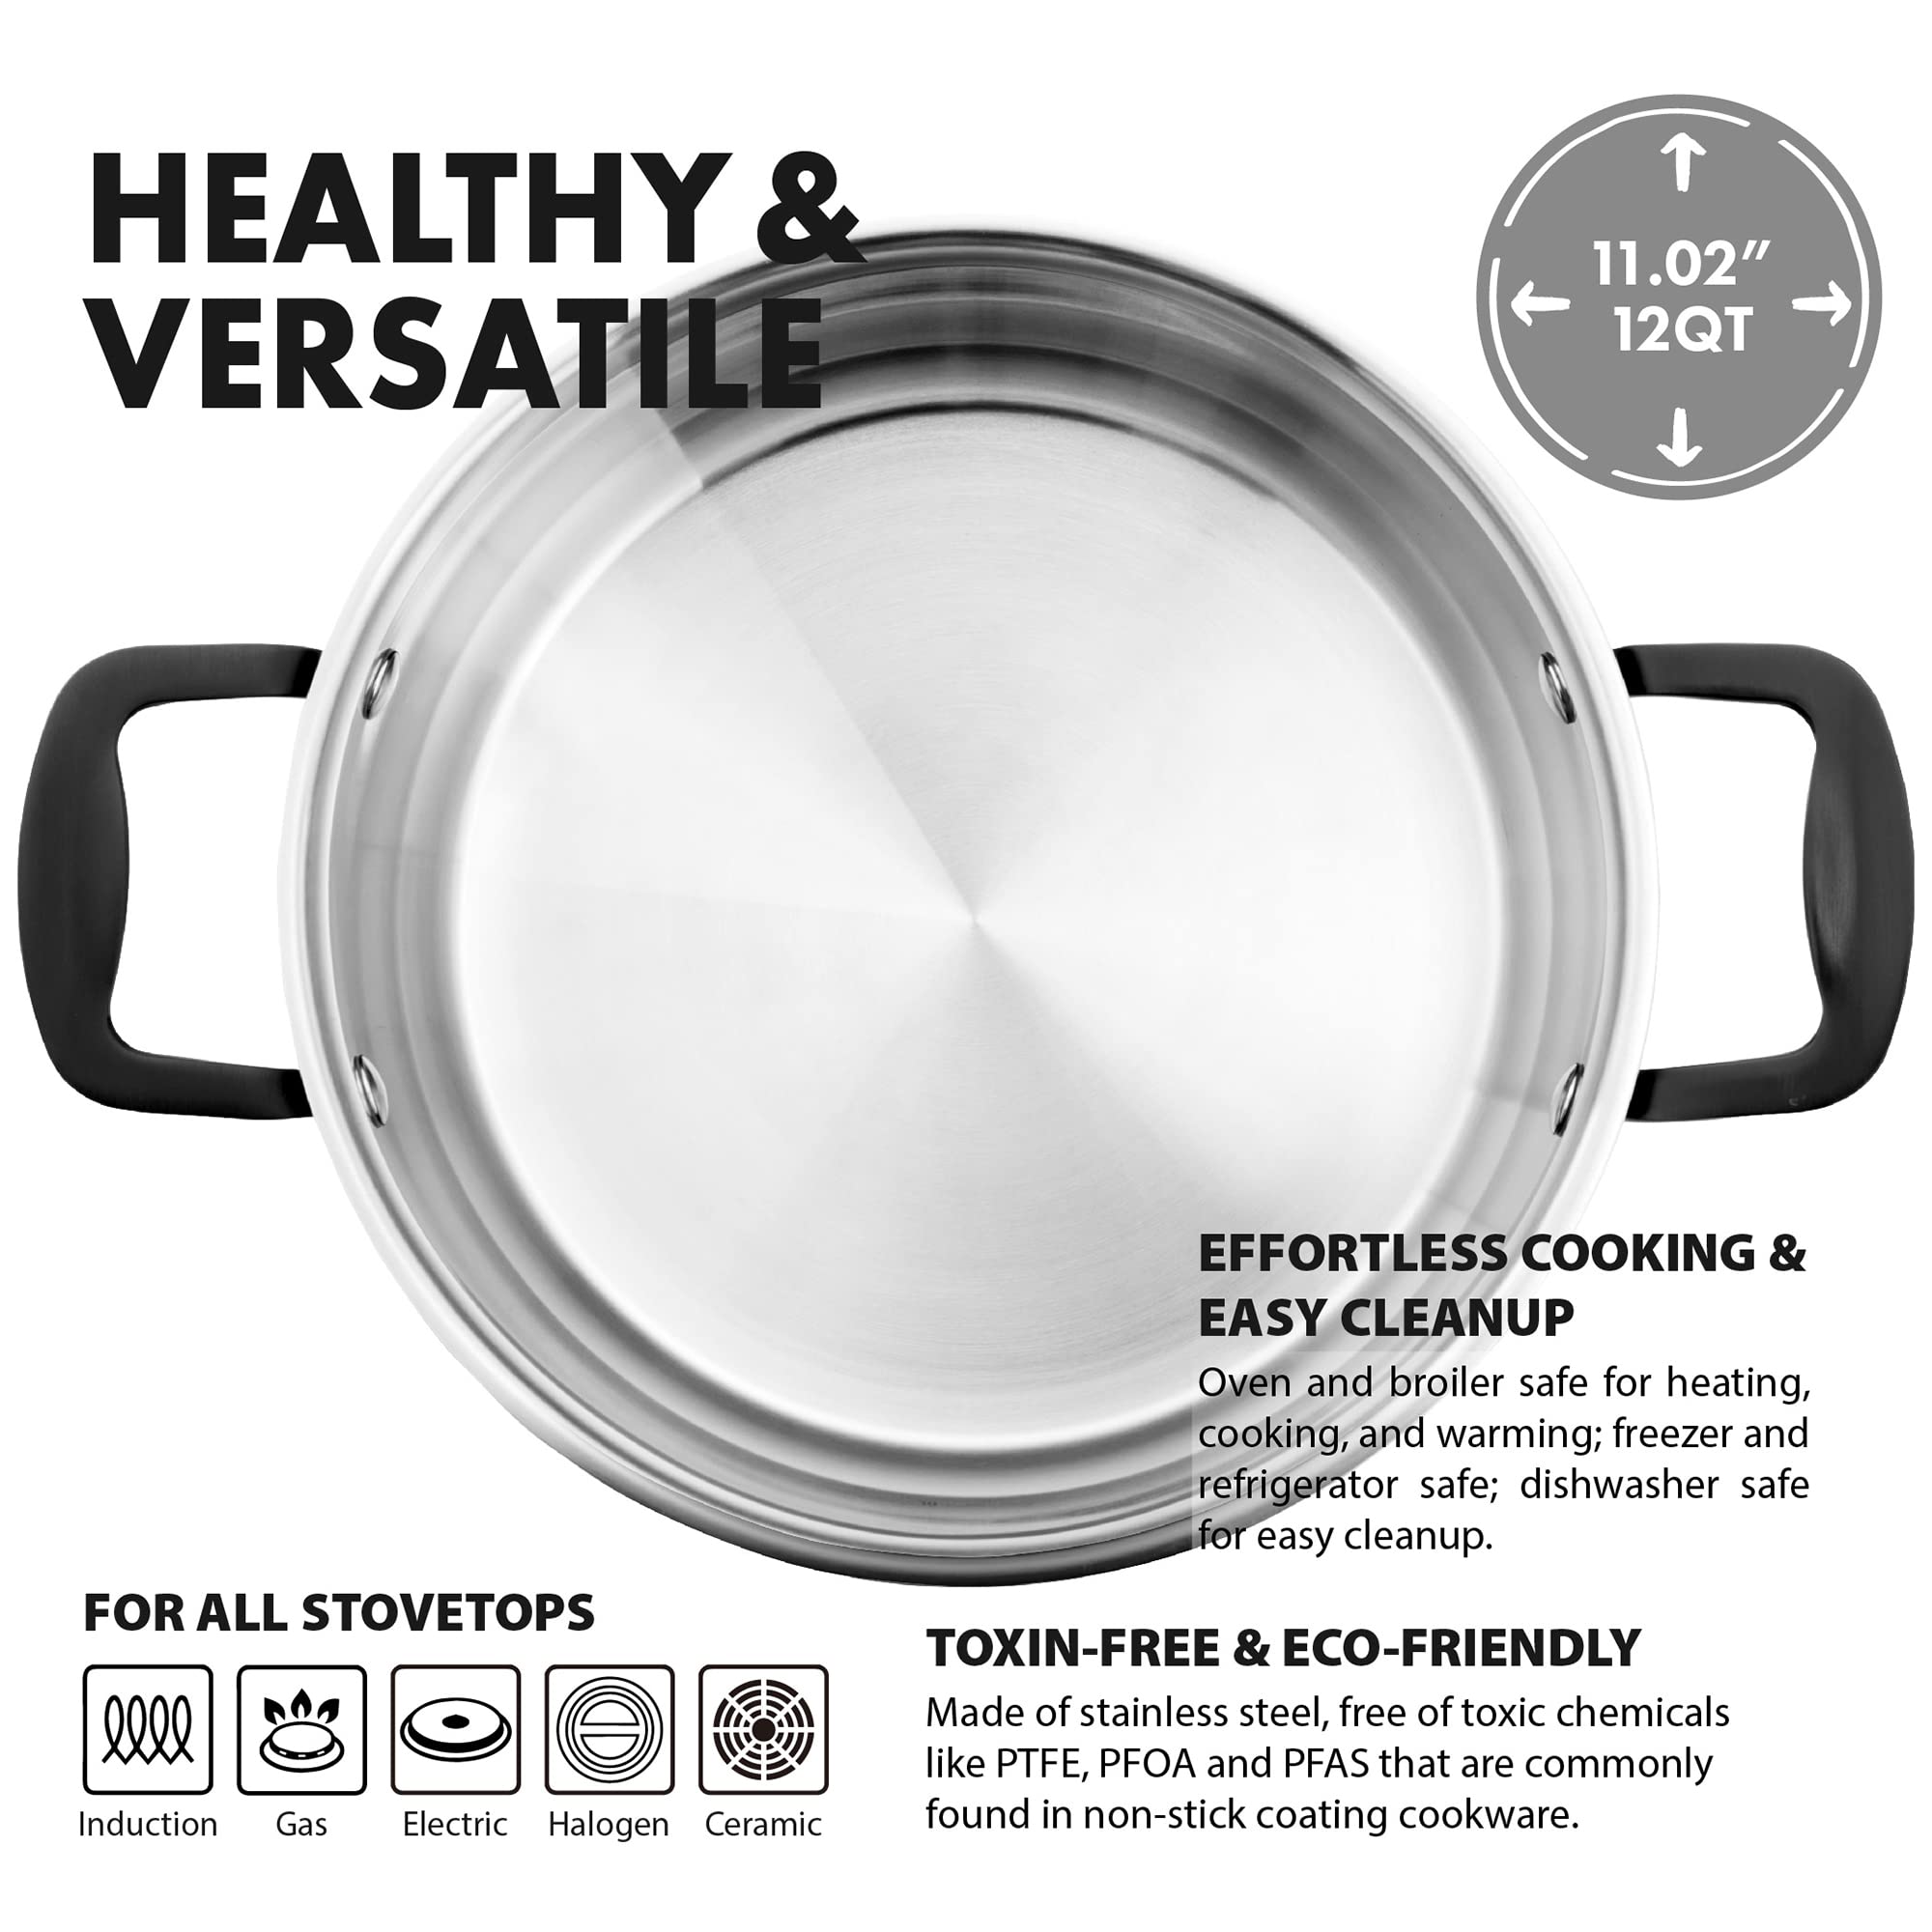 GrandTies Tri-Ply Stainless Steel Stock Pot Induction Cookware – 12 QT Capsule Bottom Stainless Steel Pot, Marquina Black Metal Handles Kitchen Cooking large Pot with Lid, Dishwasher Safe Pot & Pan